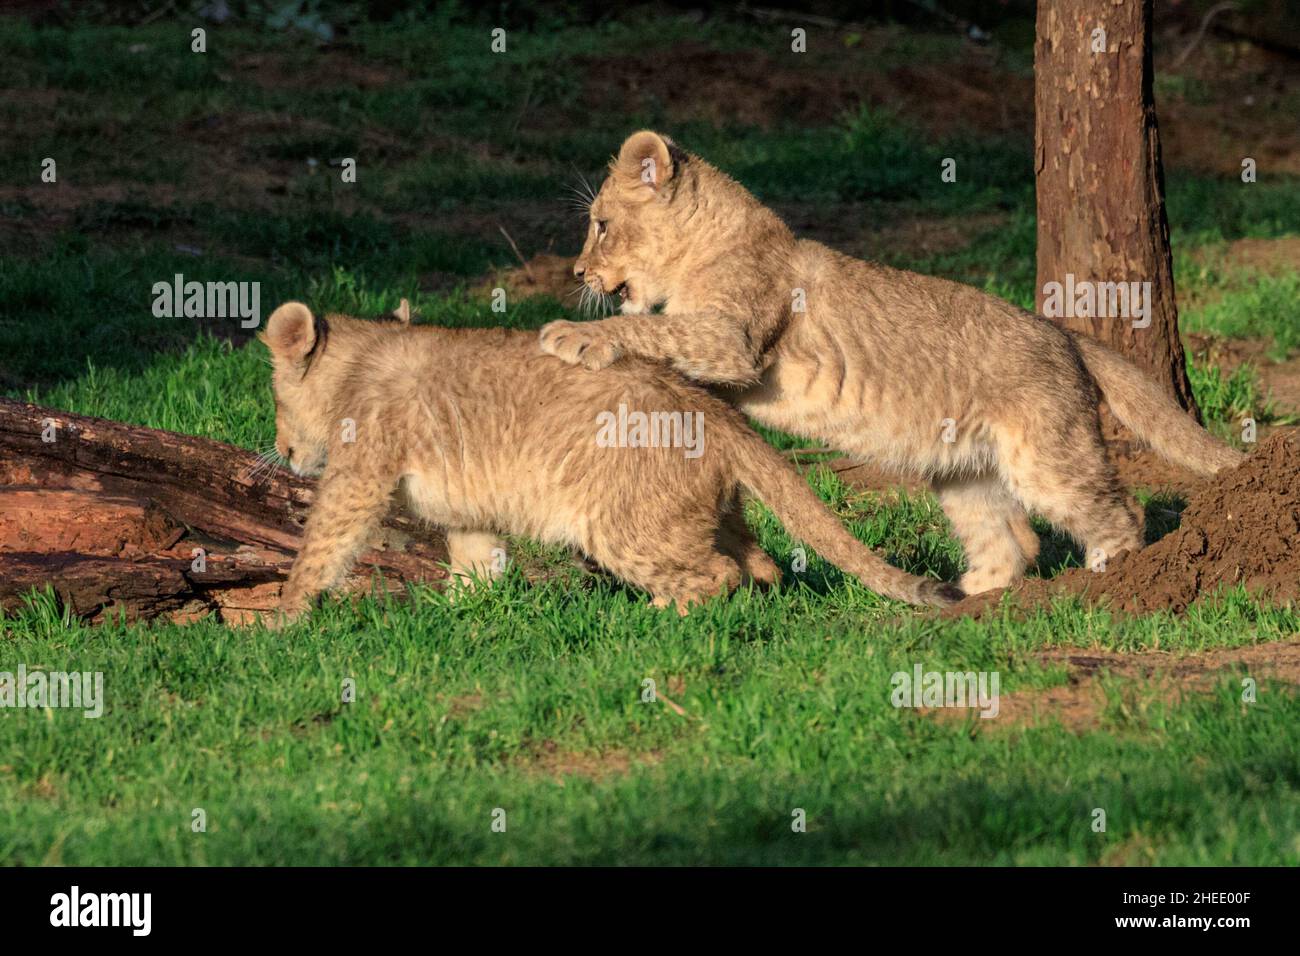 Recklinghausen, NRW, Germany. 10th Jan, 2022. Two of the African Lion triplets (Panthera leo) play in the sun. The three adventurous lion cubs, Jamila, Kumani und Malaika were born in October to mum Fiona and father Bantu, and have now gradually been introduced to the outside enclousures and public view, but can retreat to privacy when they want to at Recklinghausen's Zoom Erlebniswelt, a modern zoo recreating natural habitats built on an area of more than 30 hectares. Credit: Imageplotter/Alamy Live News Stock Photo